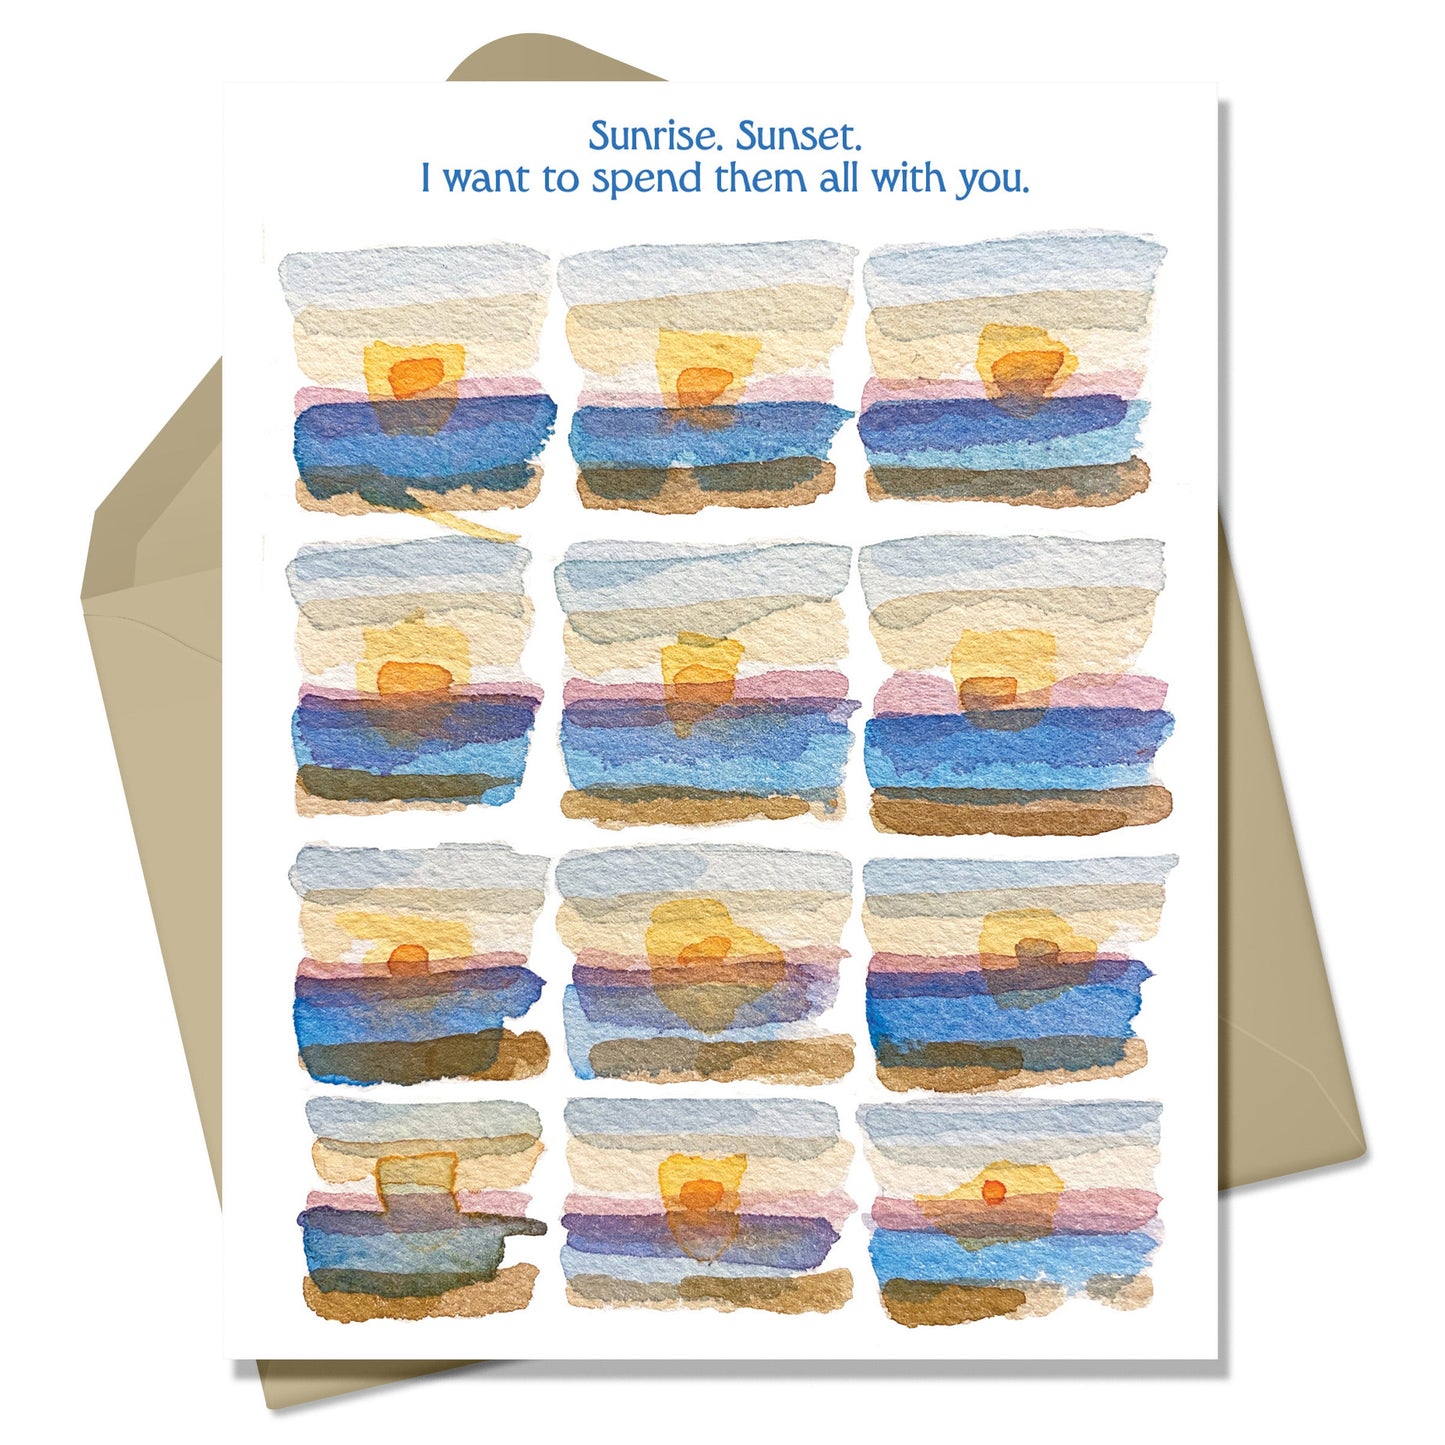 Sunrise Sunset. I want to spend them all with you Greeting Card-Wholesale